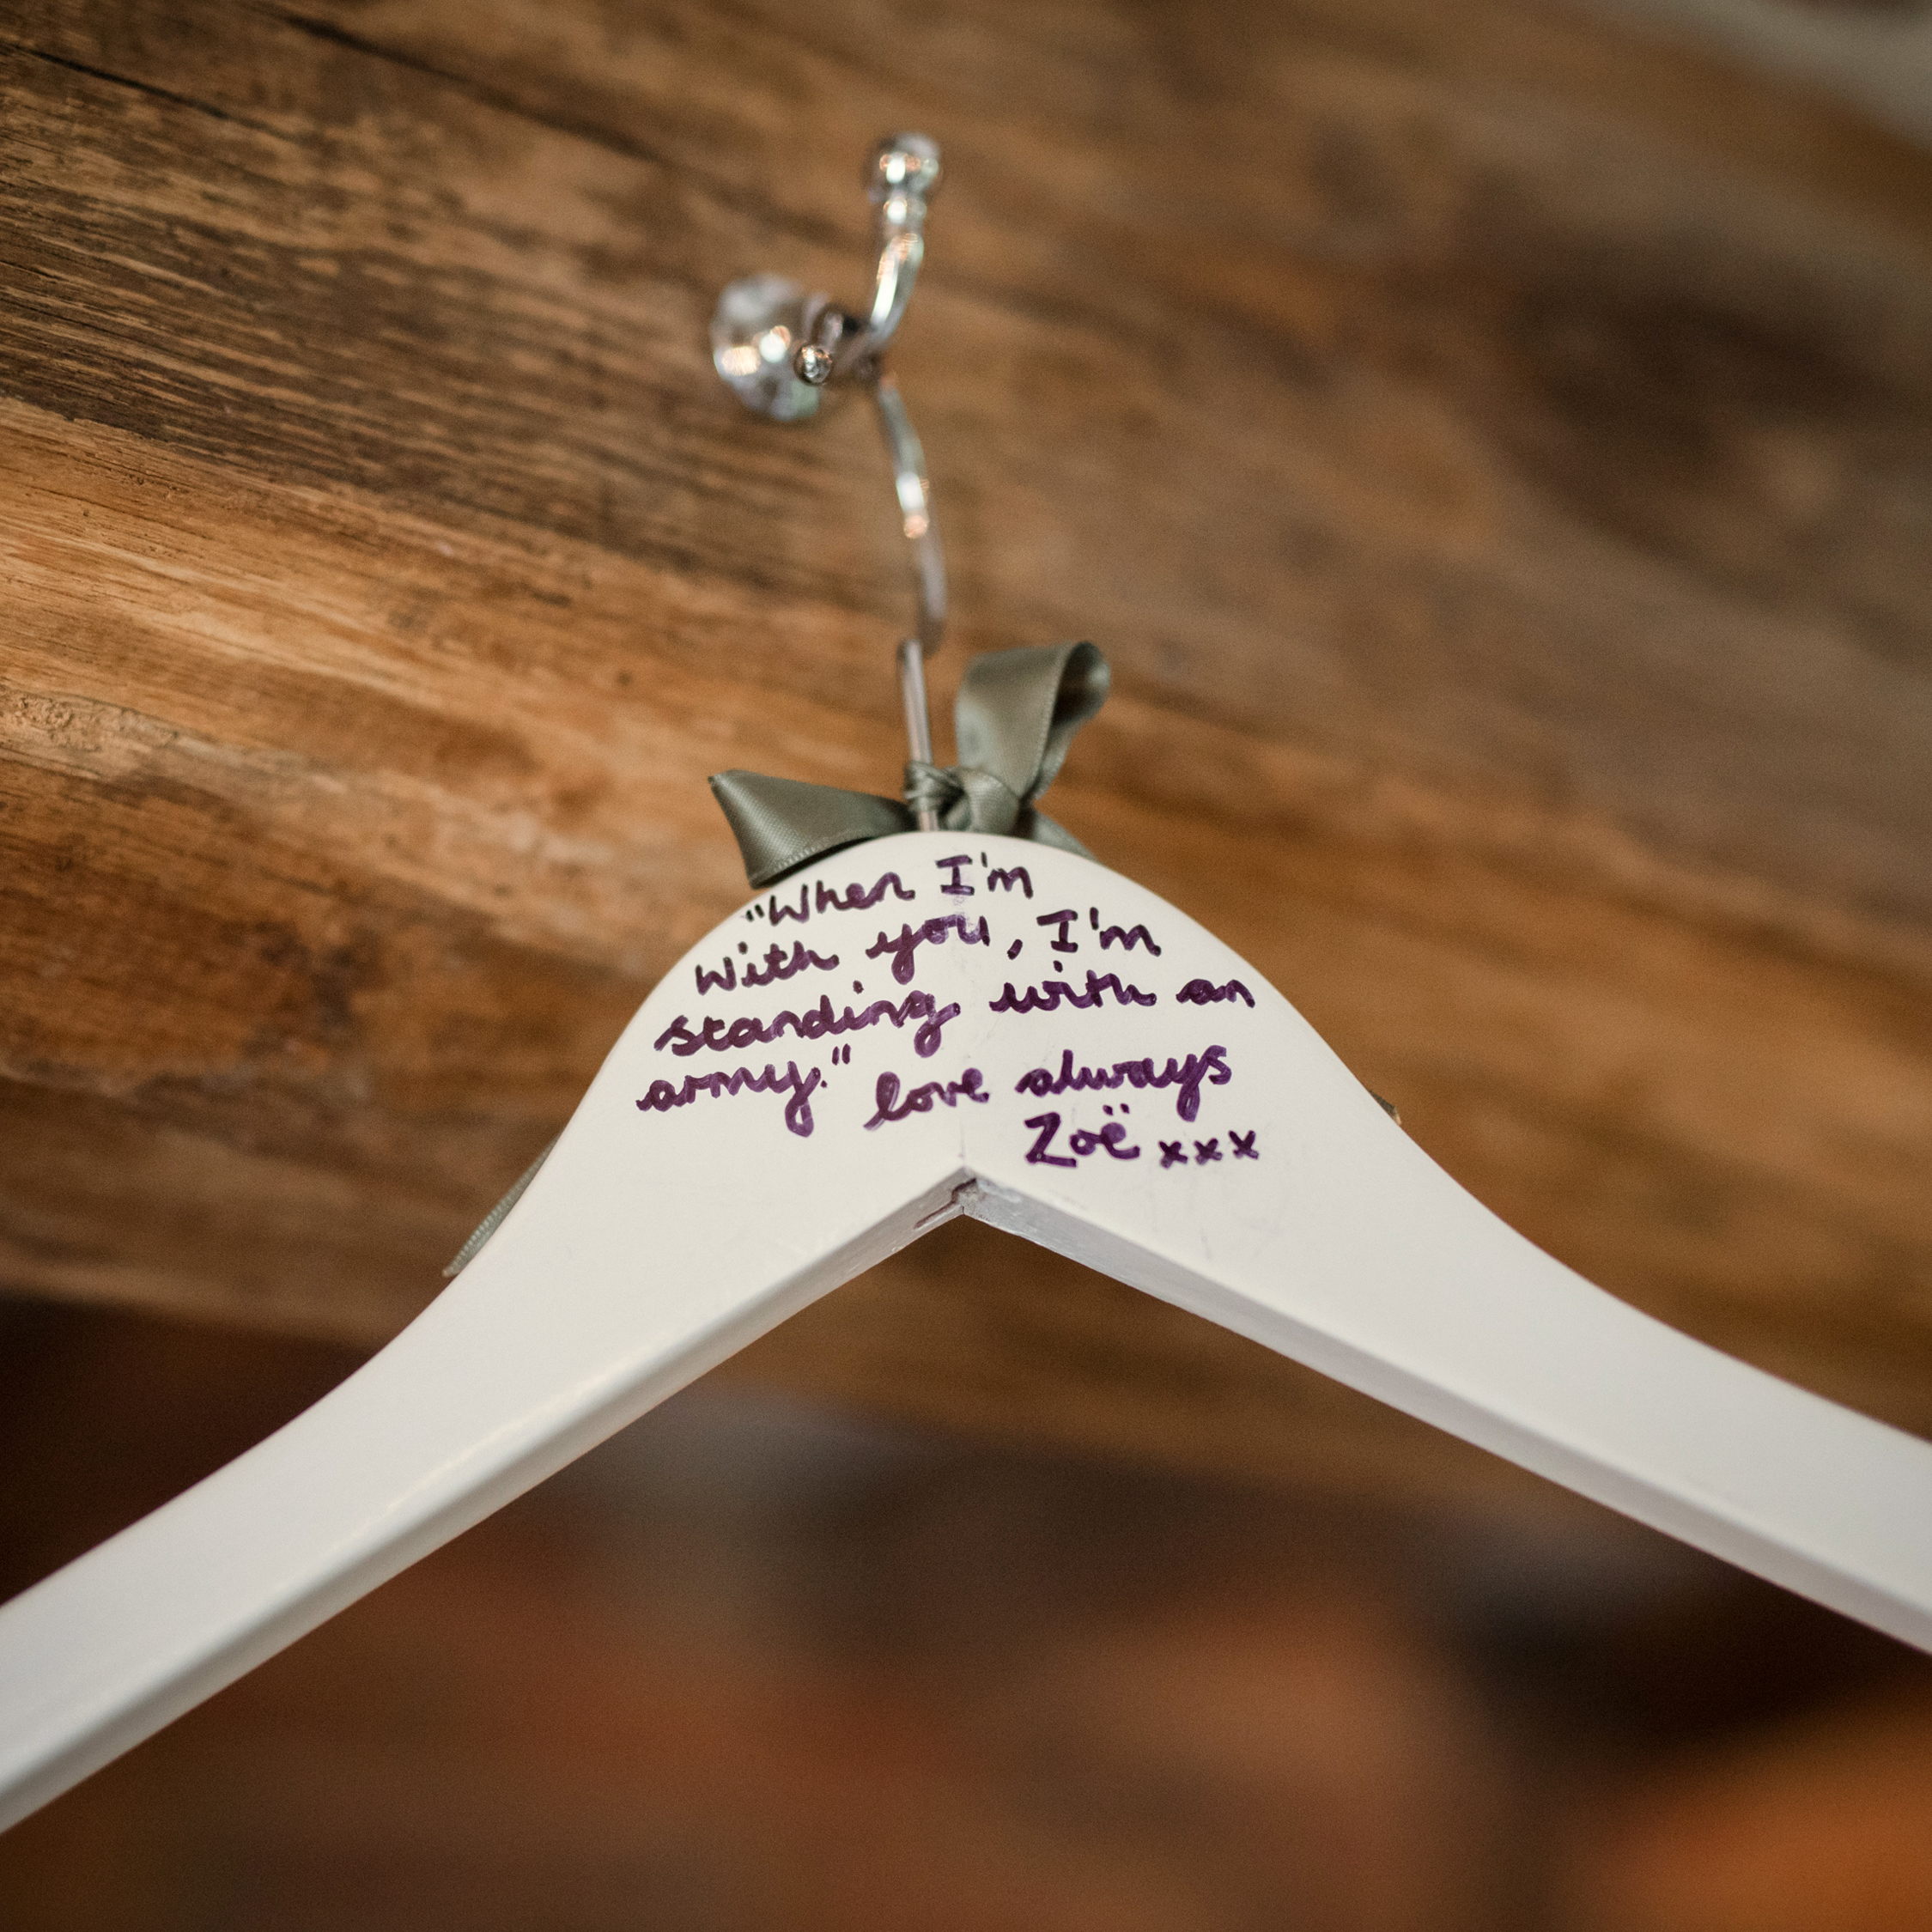 Wedding details to impress guests, personalised wedding touches